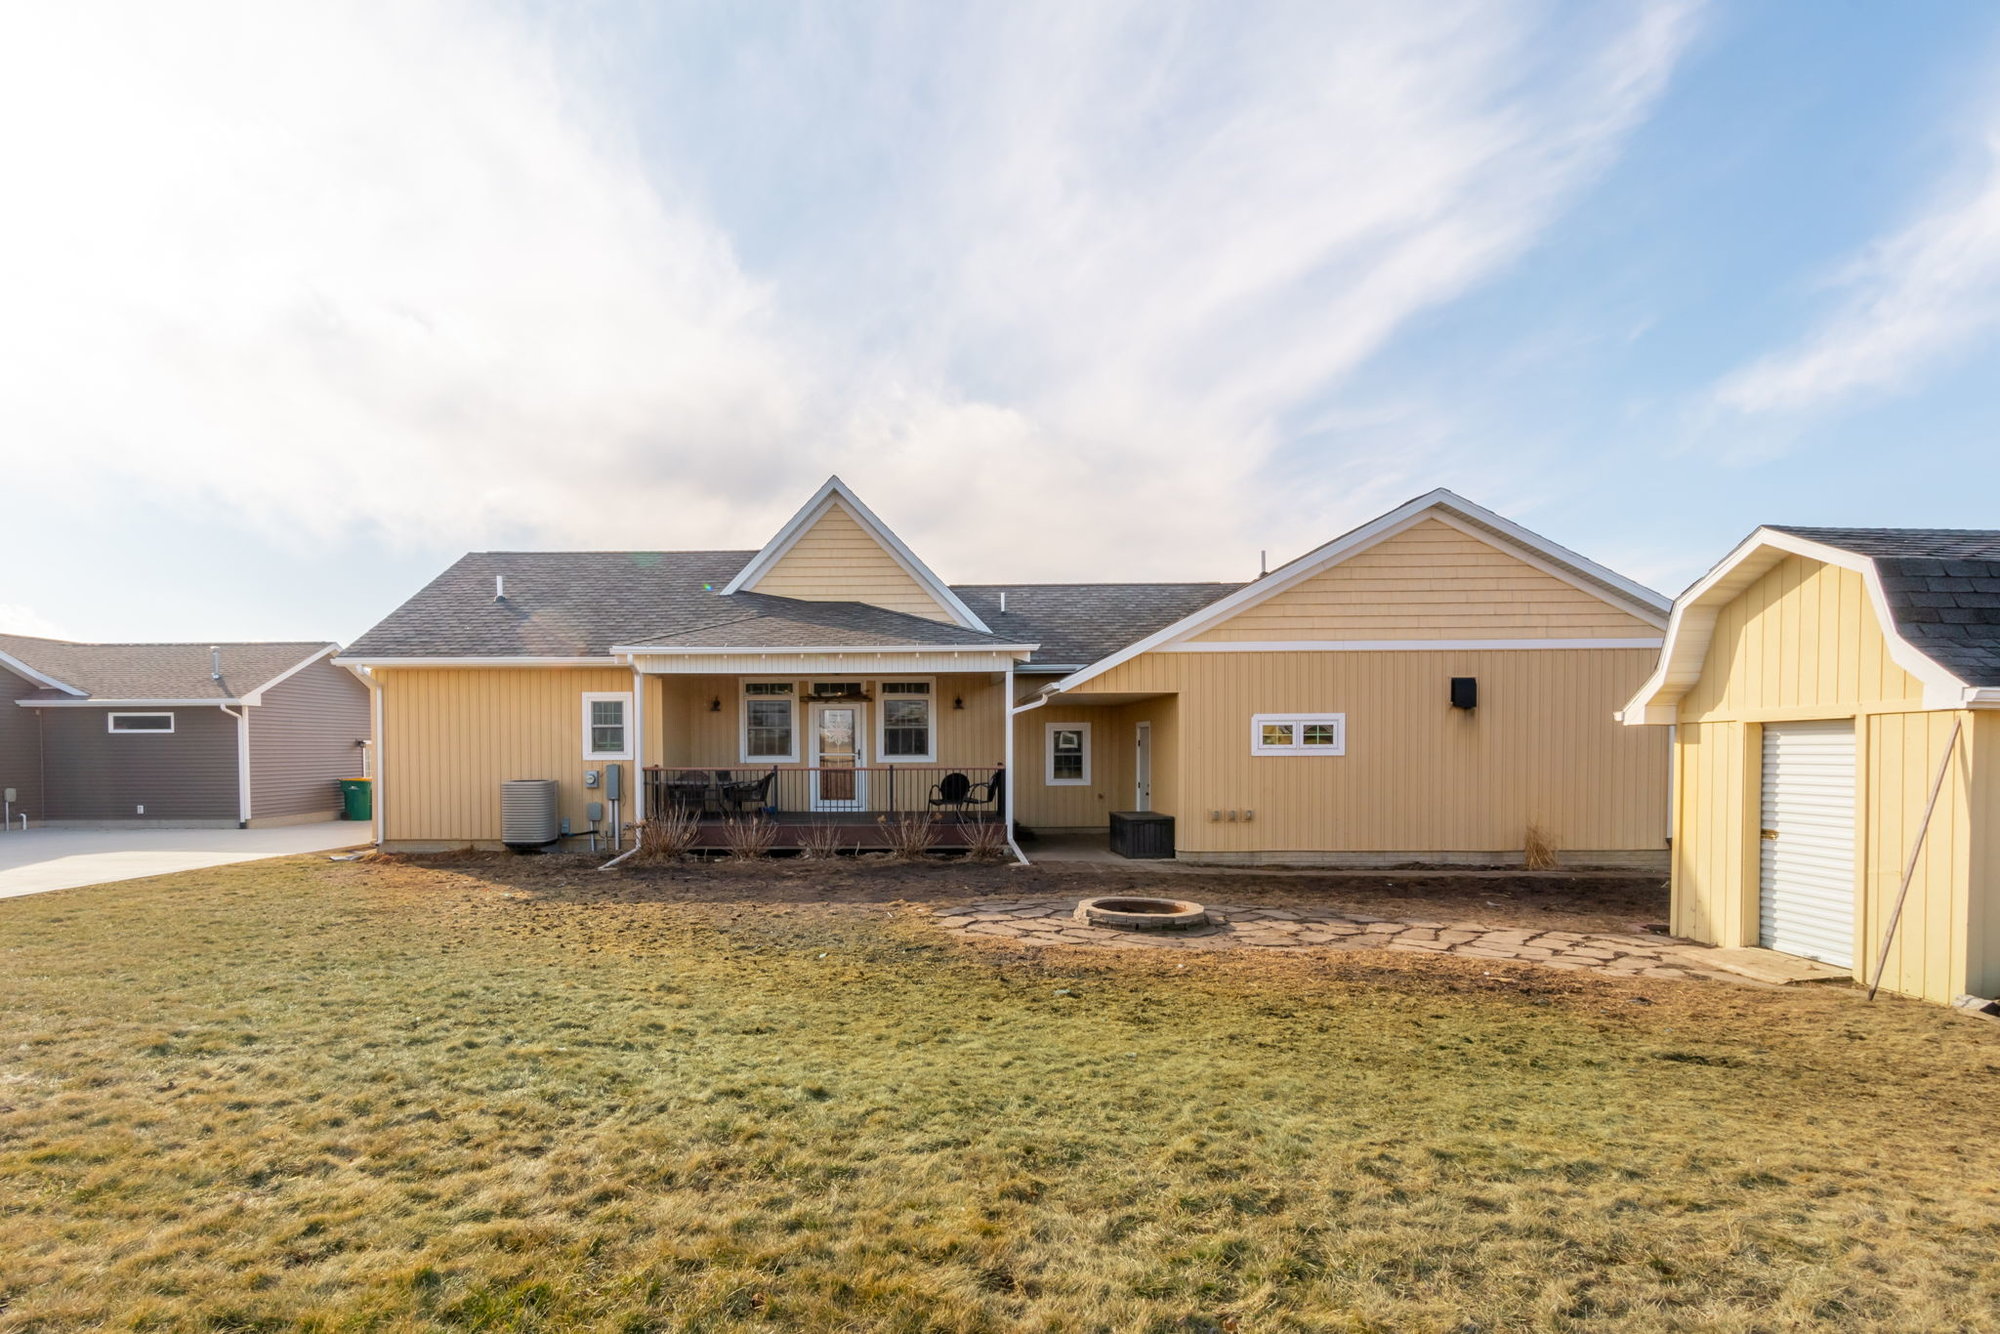 Modern Farmhouse Meets Country Chic in this Beautifully Crafted Custom Home in Independence Iowa